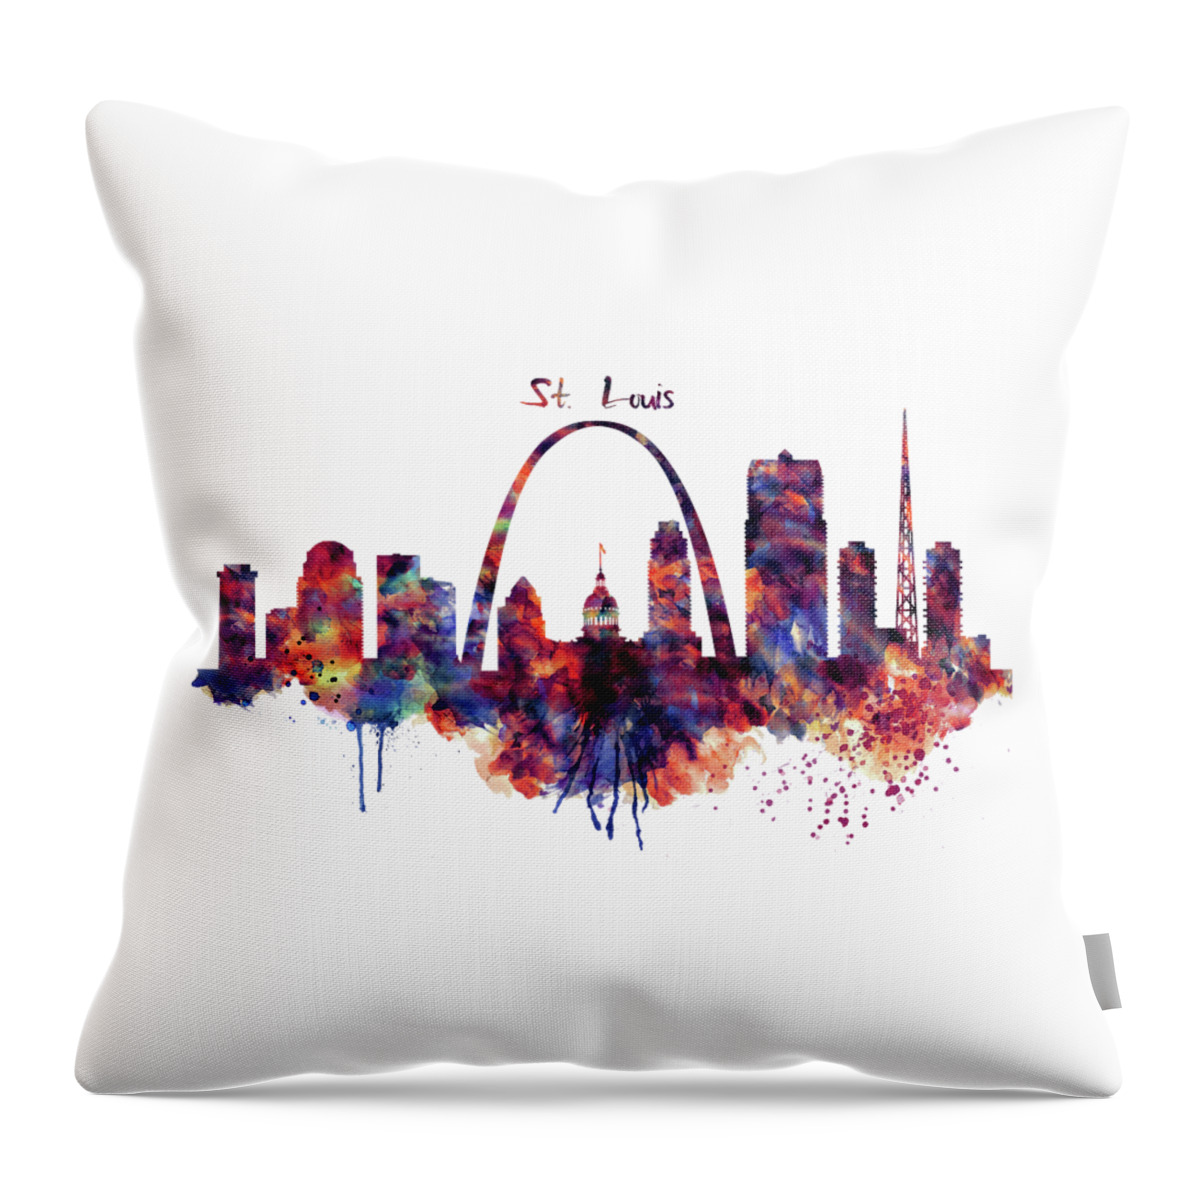 St Louis Throw Pillow featuring the painting St Louis Skyline by Marian Voicu